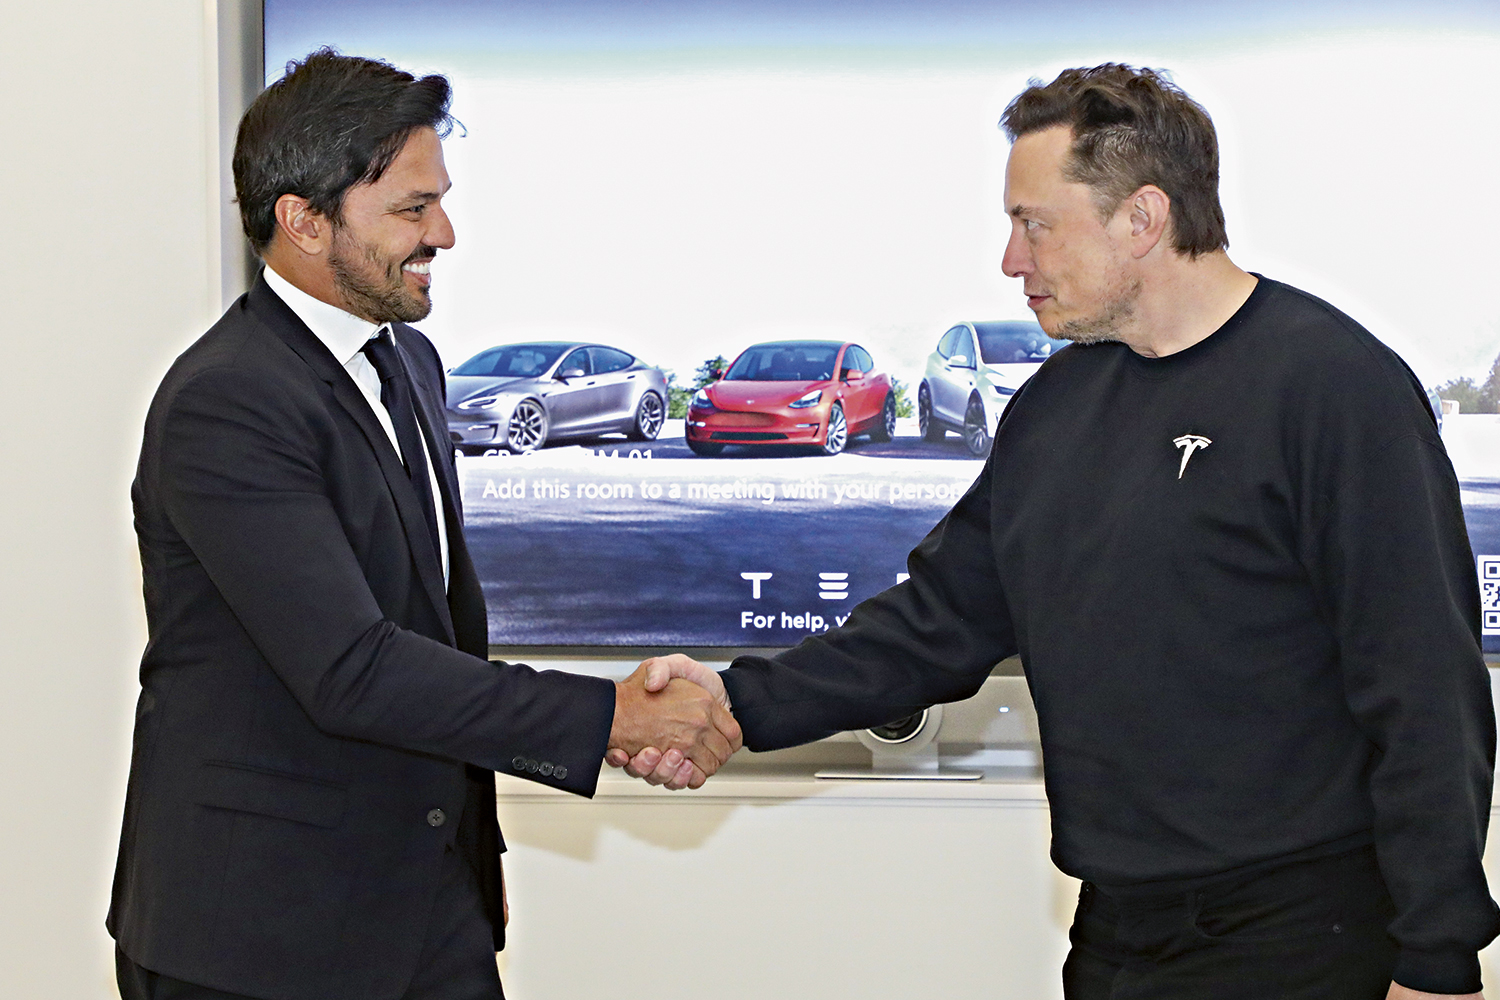 FOCUS ON THE FUTURE - Fábio Faria and Musk: the meeting revealed the entrepreneur's interest in bringing new technologies to the country -